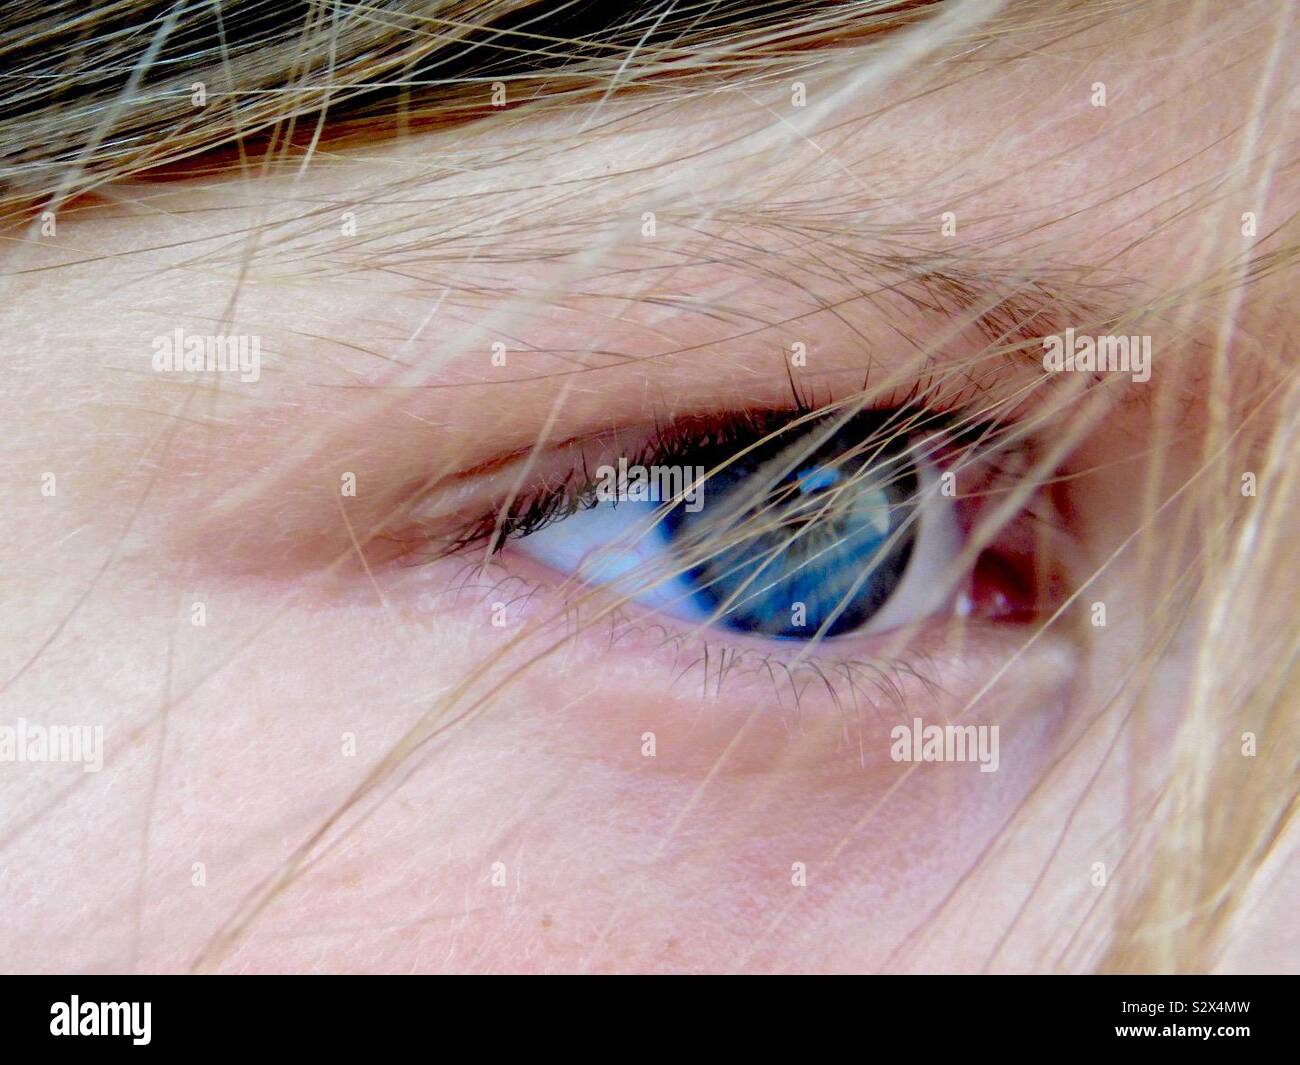 Sideways perspective of child’s blue eyes with wind blowing hair in way. Stock Photo